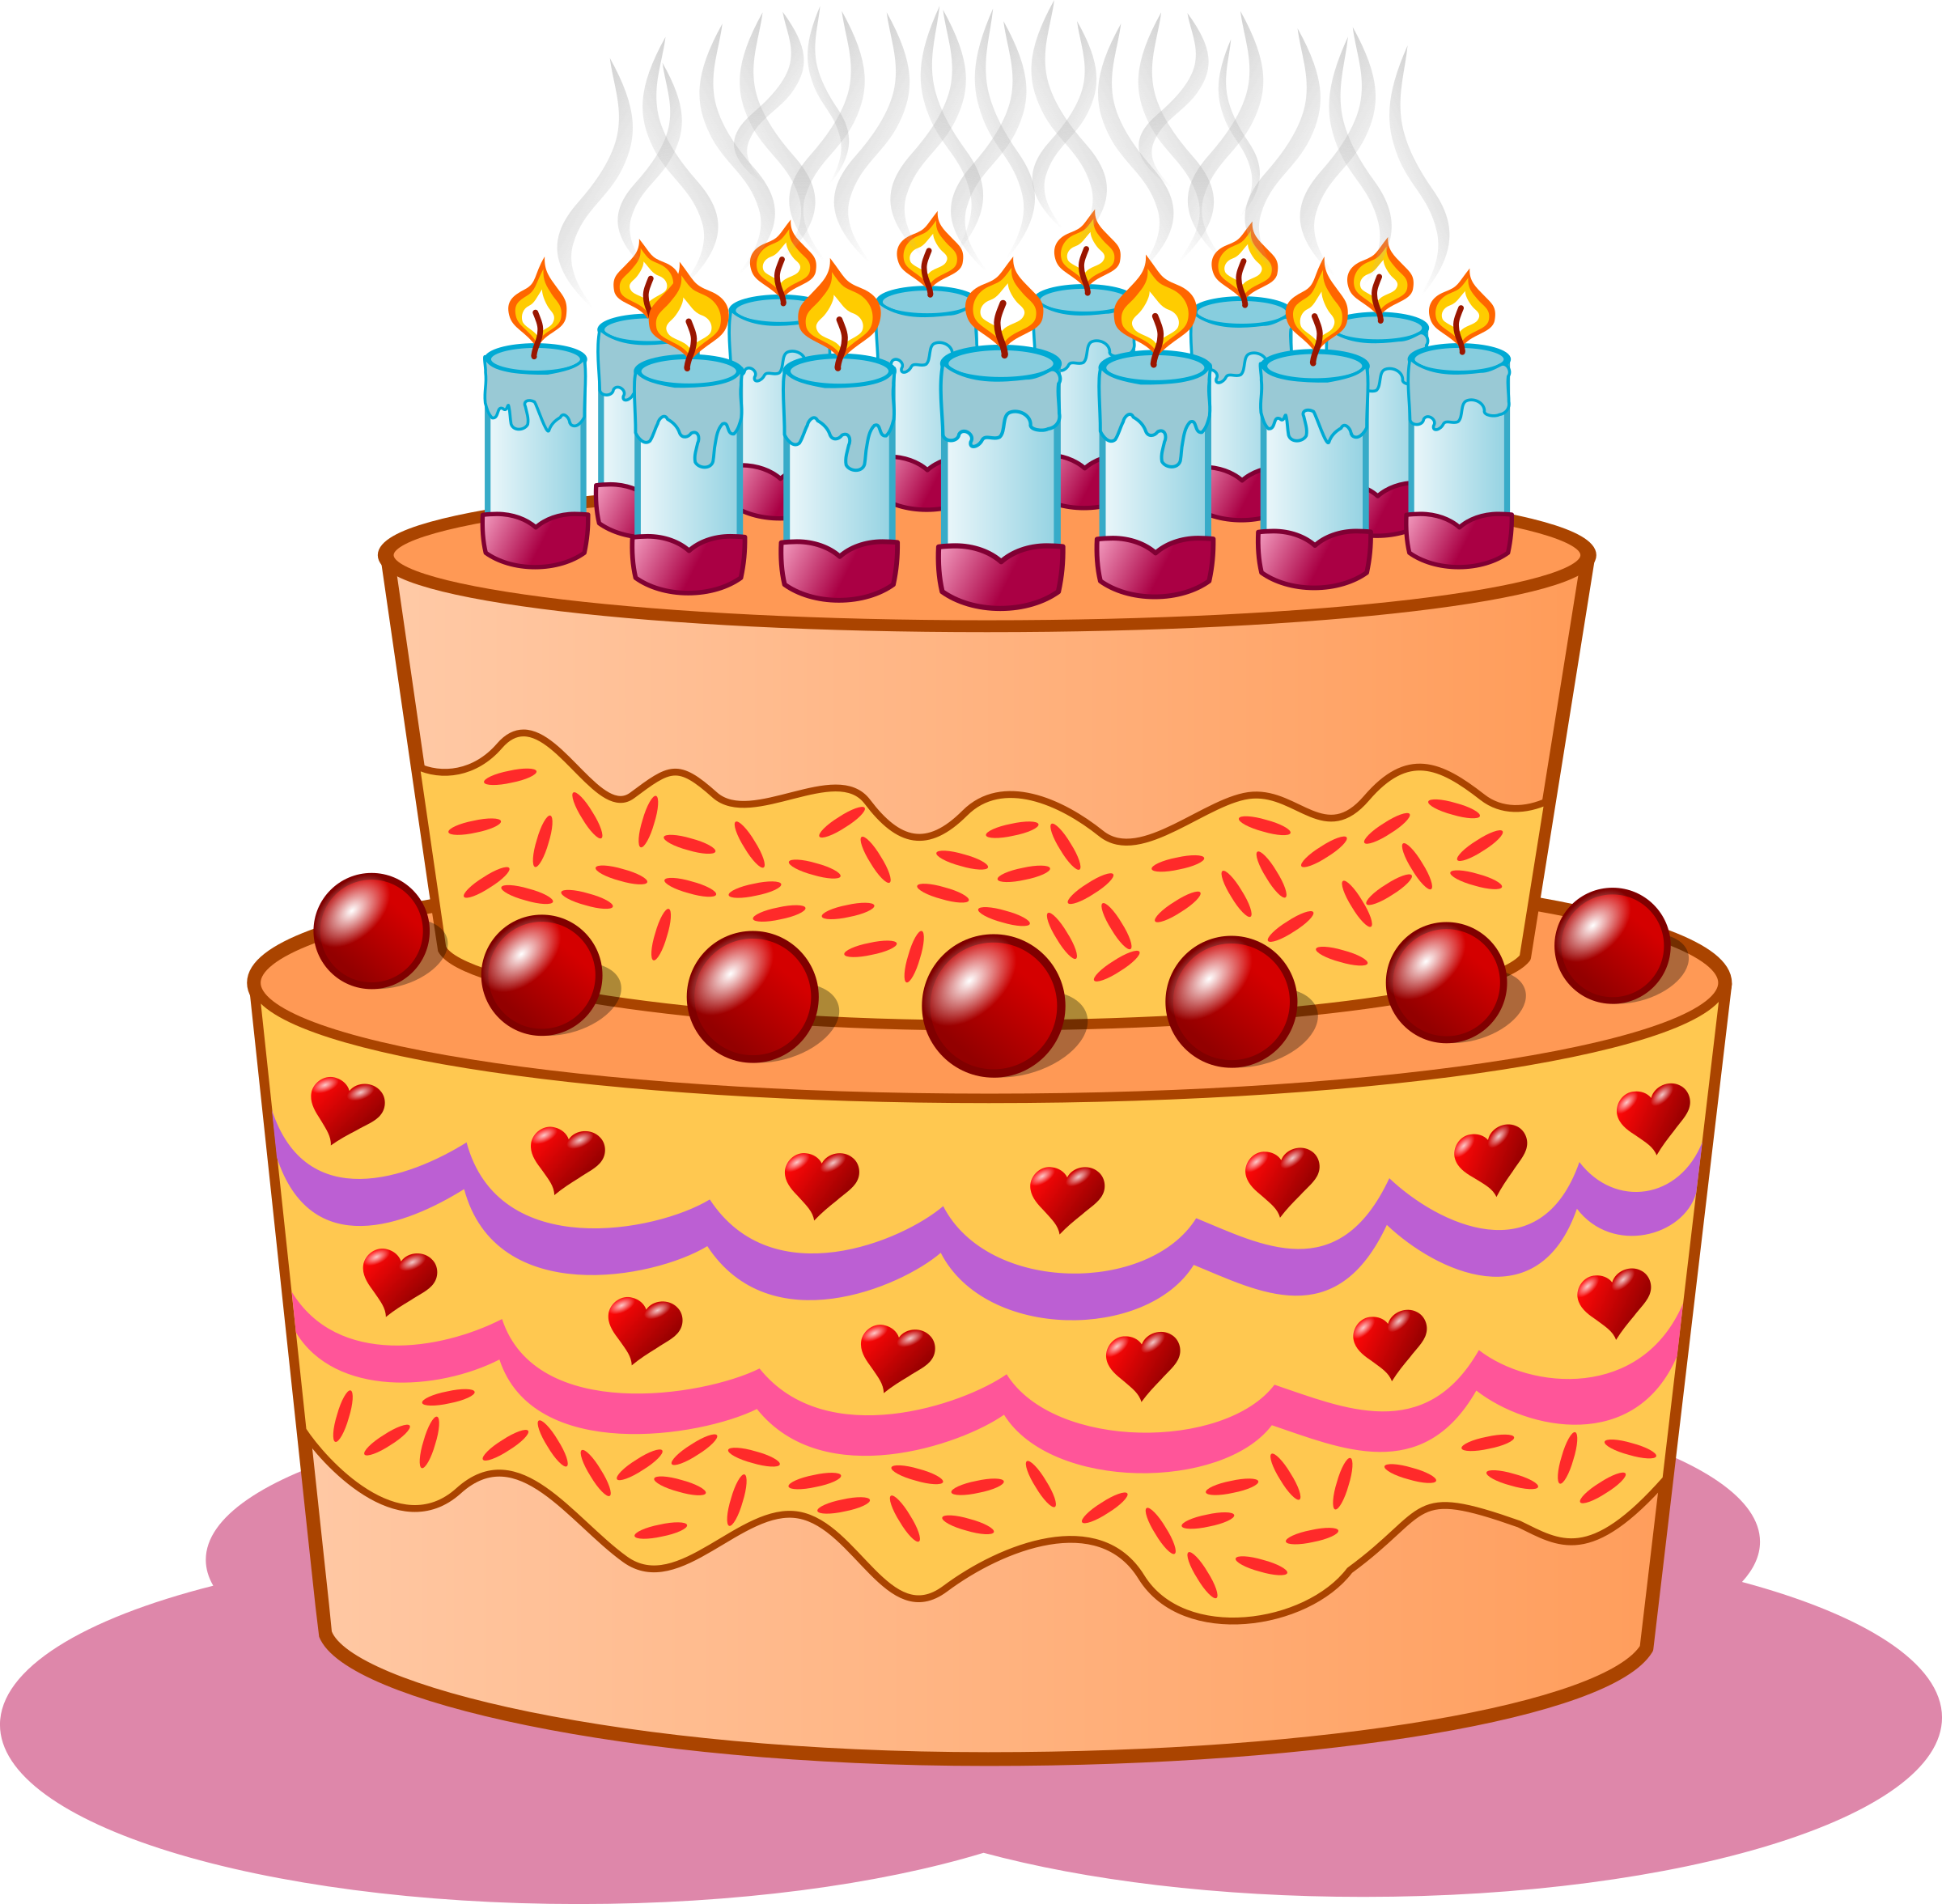 Birthday Cake - Birthday Cake Clipart, Transparent background PNG HD thumbnail